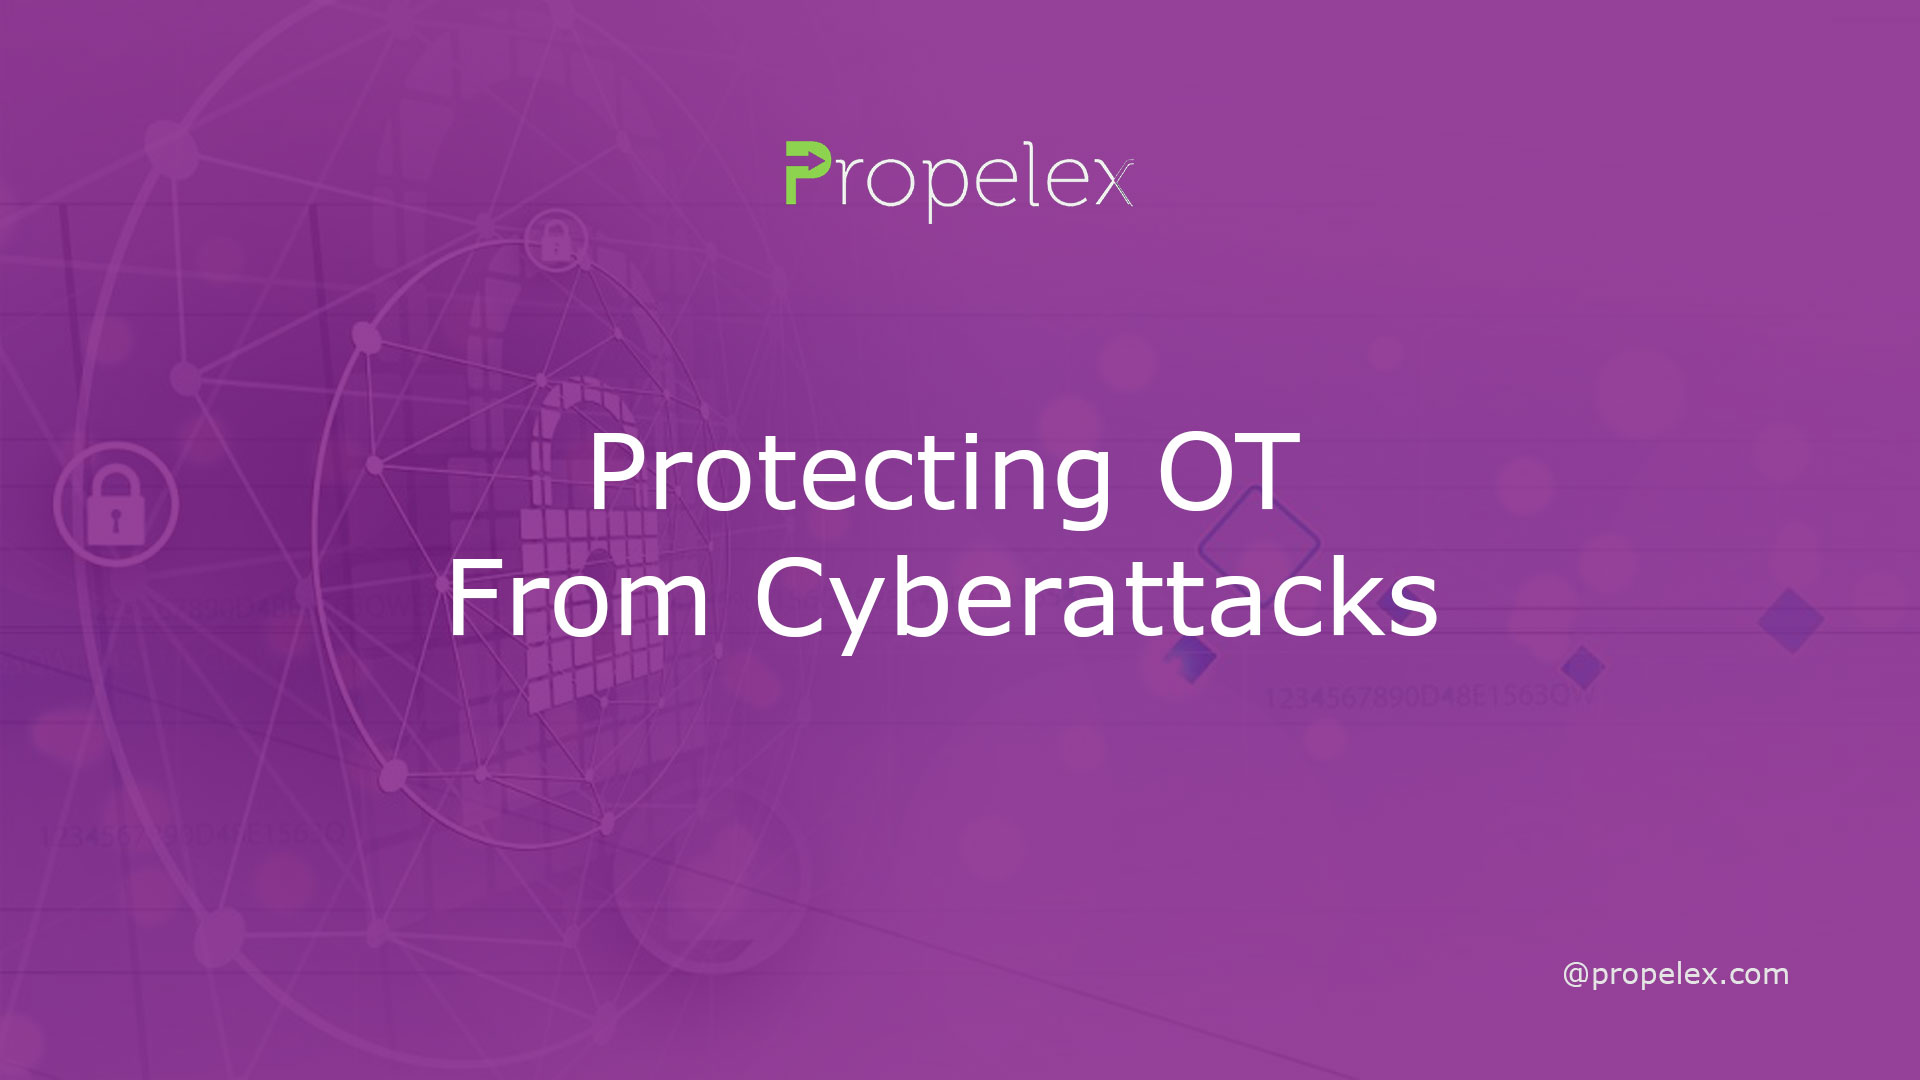 Protecting OT From Cyberattacks